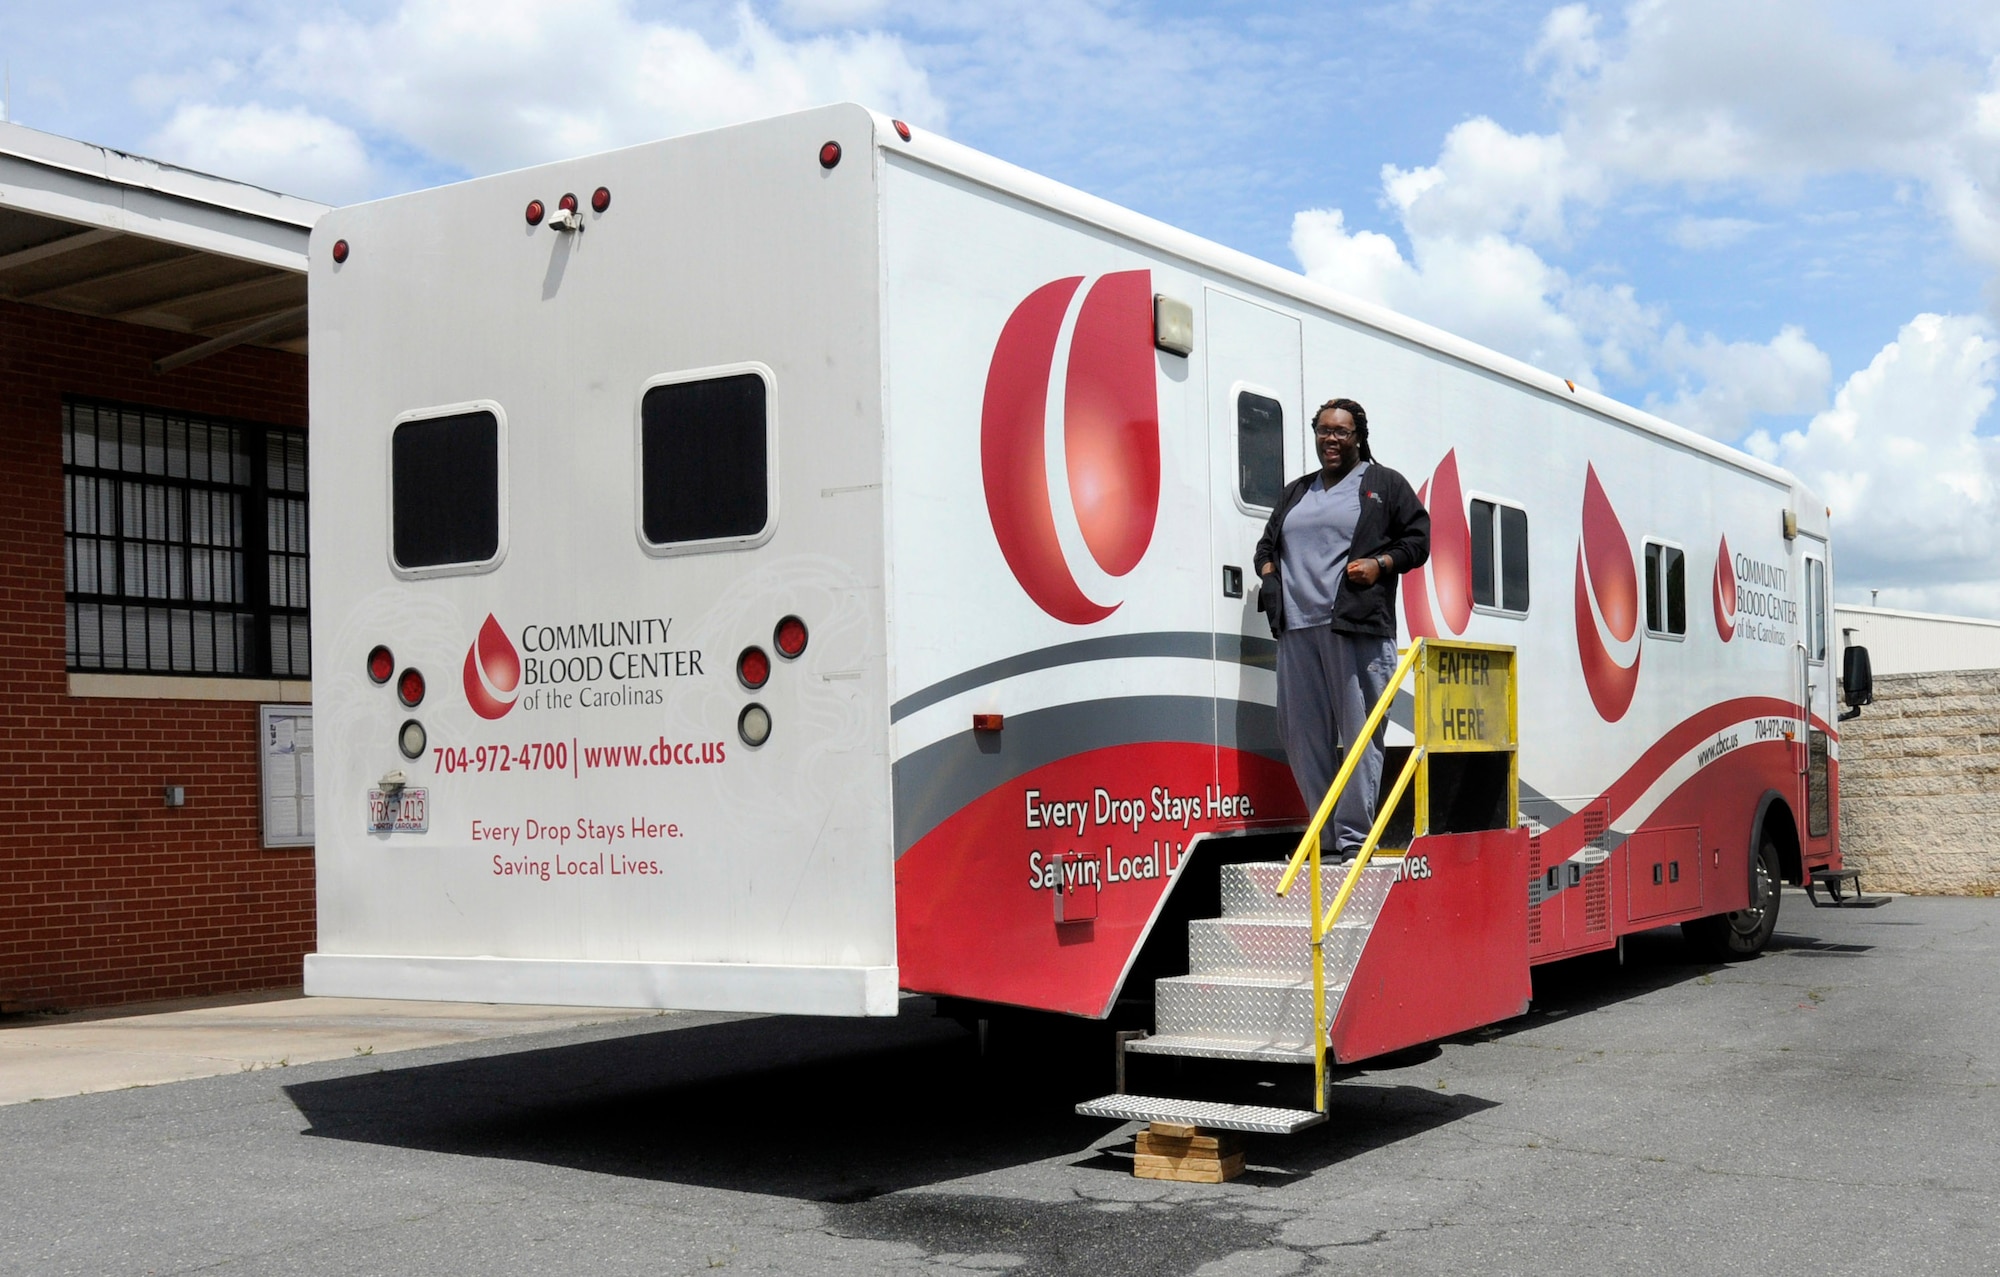 A nurse exits the Community Blood Center of the Carolinas mobile blood donation unit during a blood drive held at the North Carolina Air National Guard base, Charlotte Douglas Intl. Airport, April 18, 2015.  CBCC is an organization that supplies blood to hospitals in the local Charlotte area. Donating one pint takes an hour or less, and in the end one walks away having saved up to three lives. (U.S. Air National Guard photo by Master Sgt. Patricia F. Moran, 145th Public Affairs/Released)